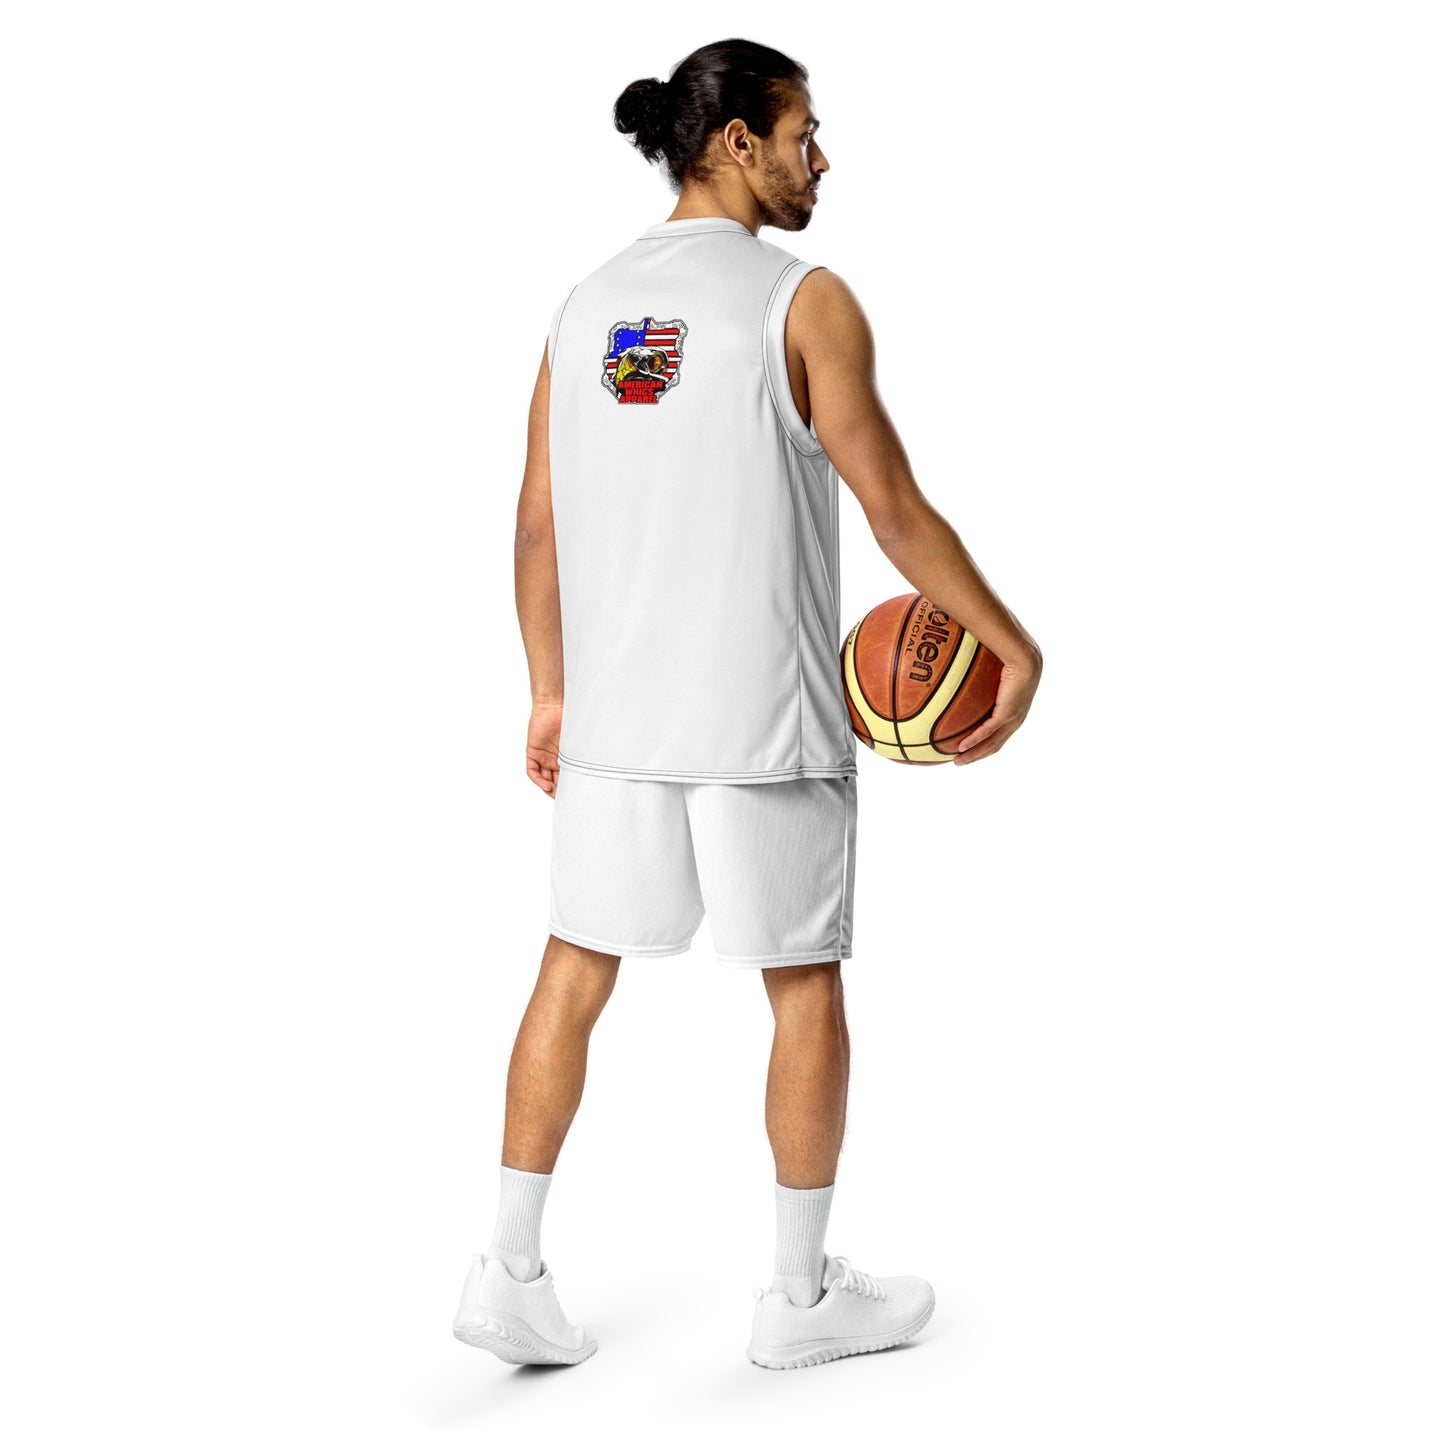 Freedom Recycled unisex basketball jersey